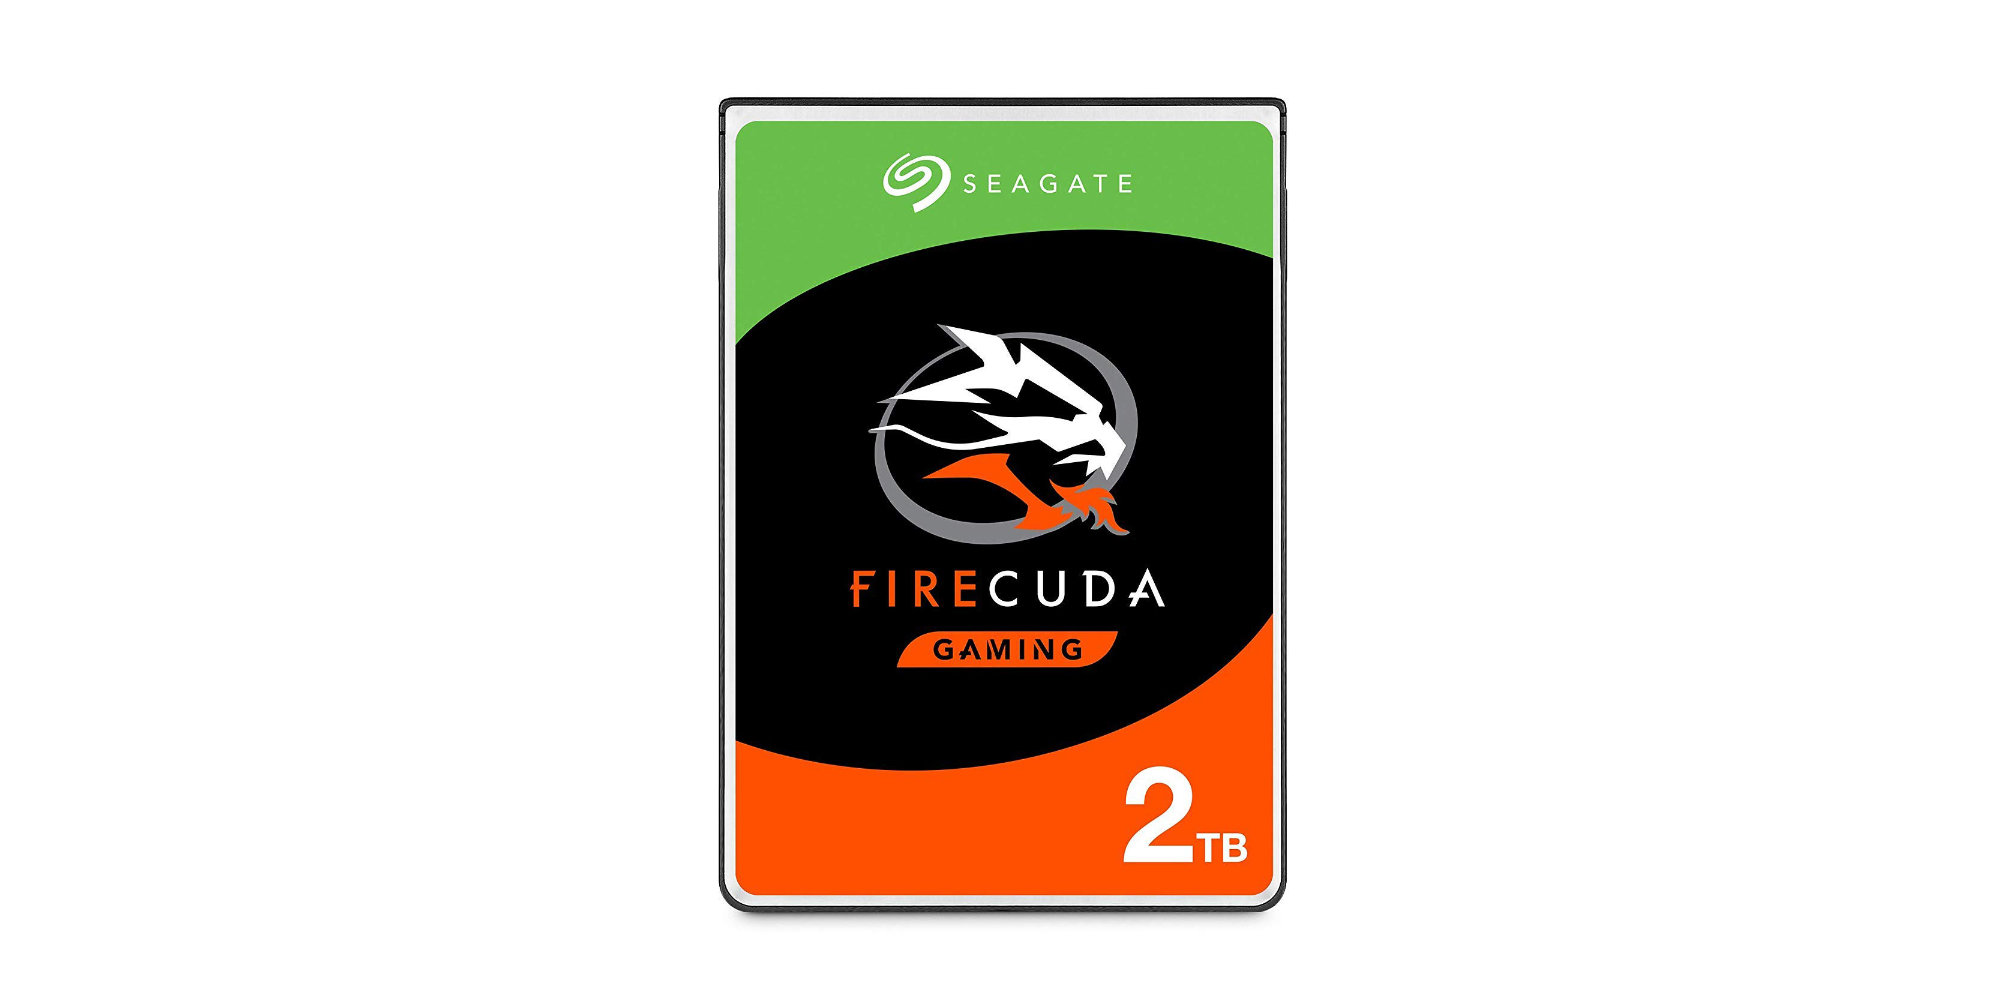 Seagate FireCuda Gaming SSHD Review: Great for Gamers